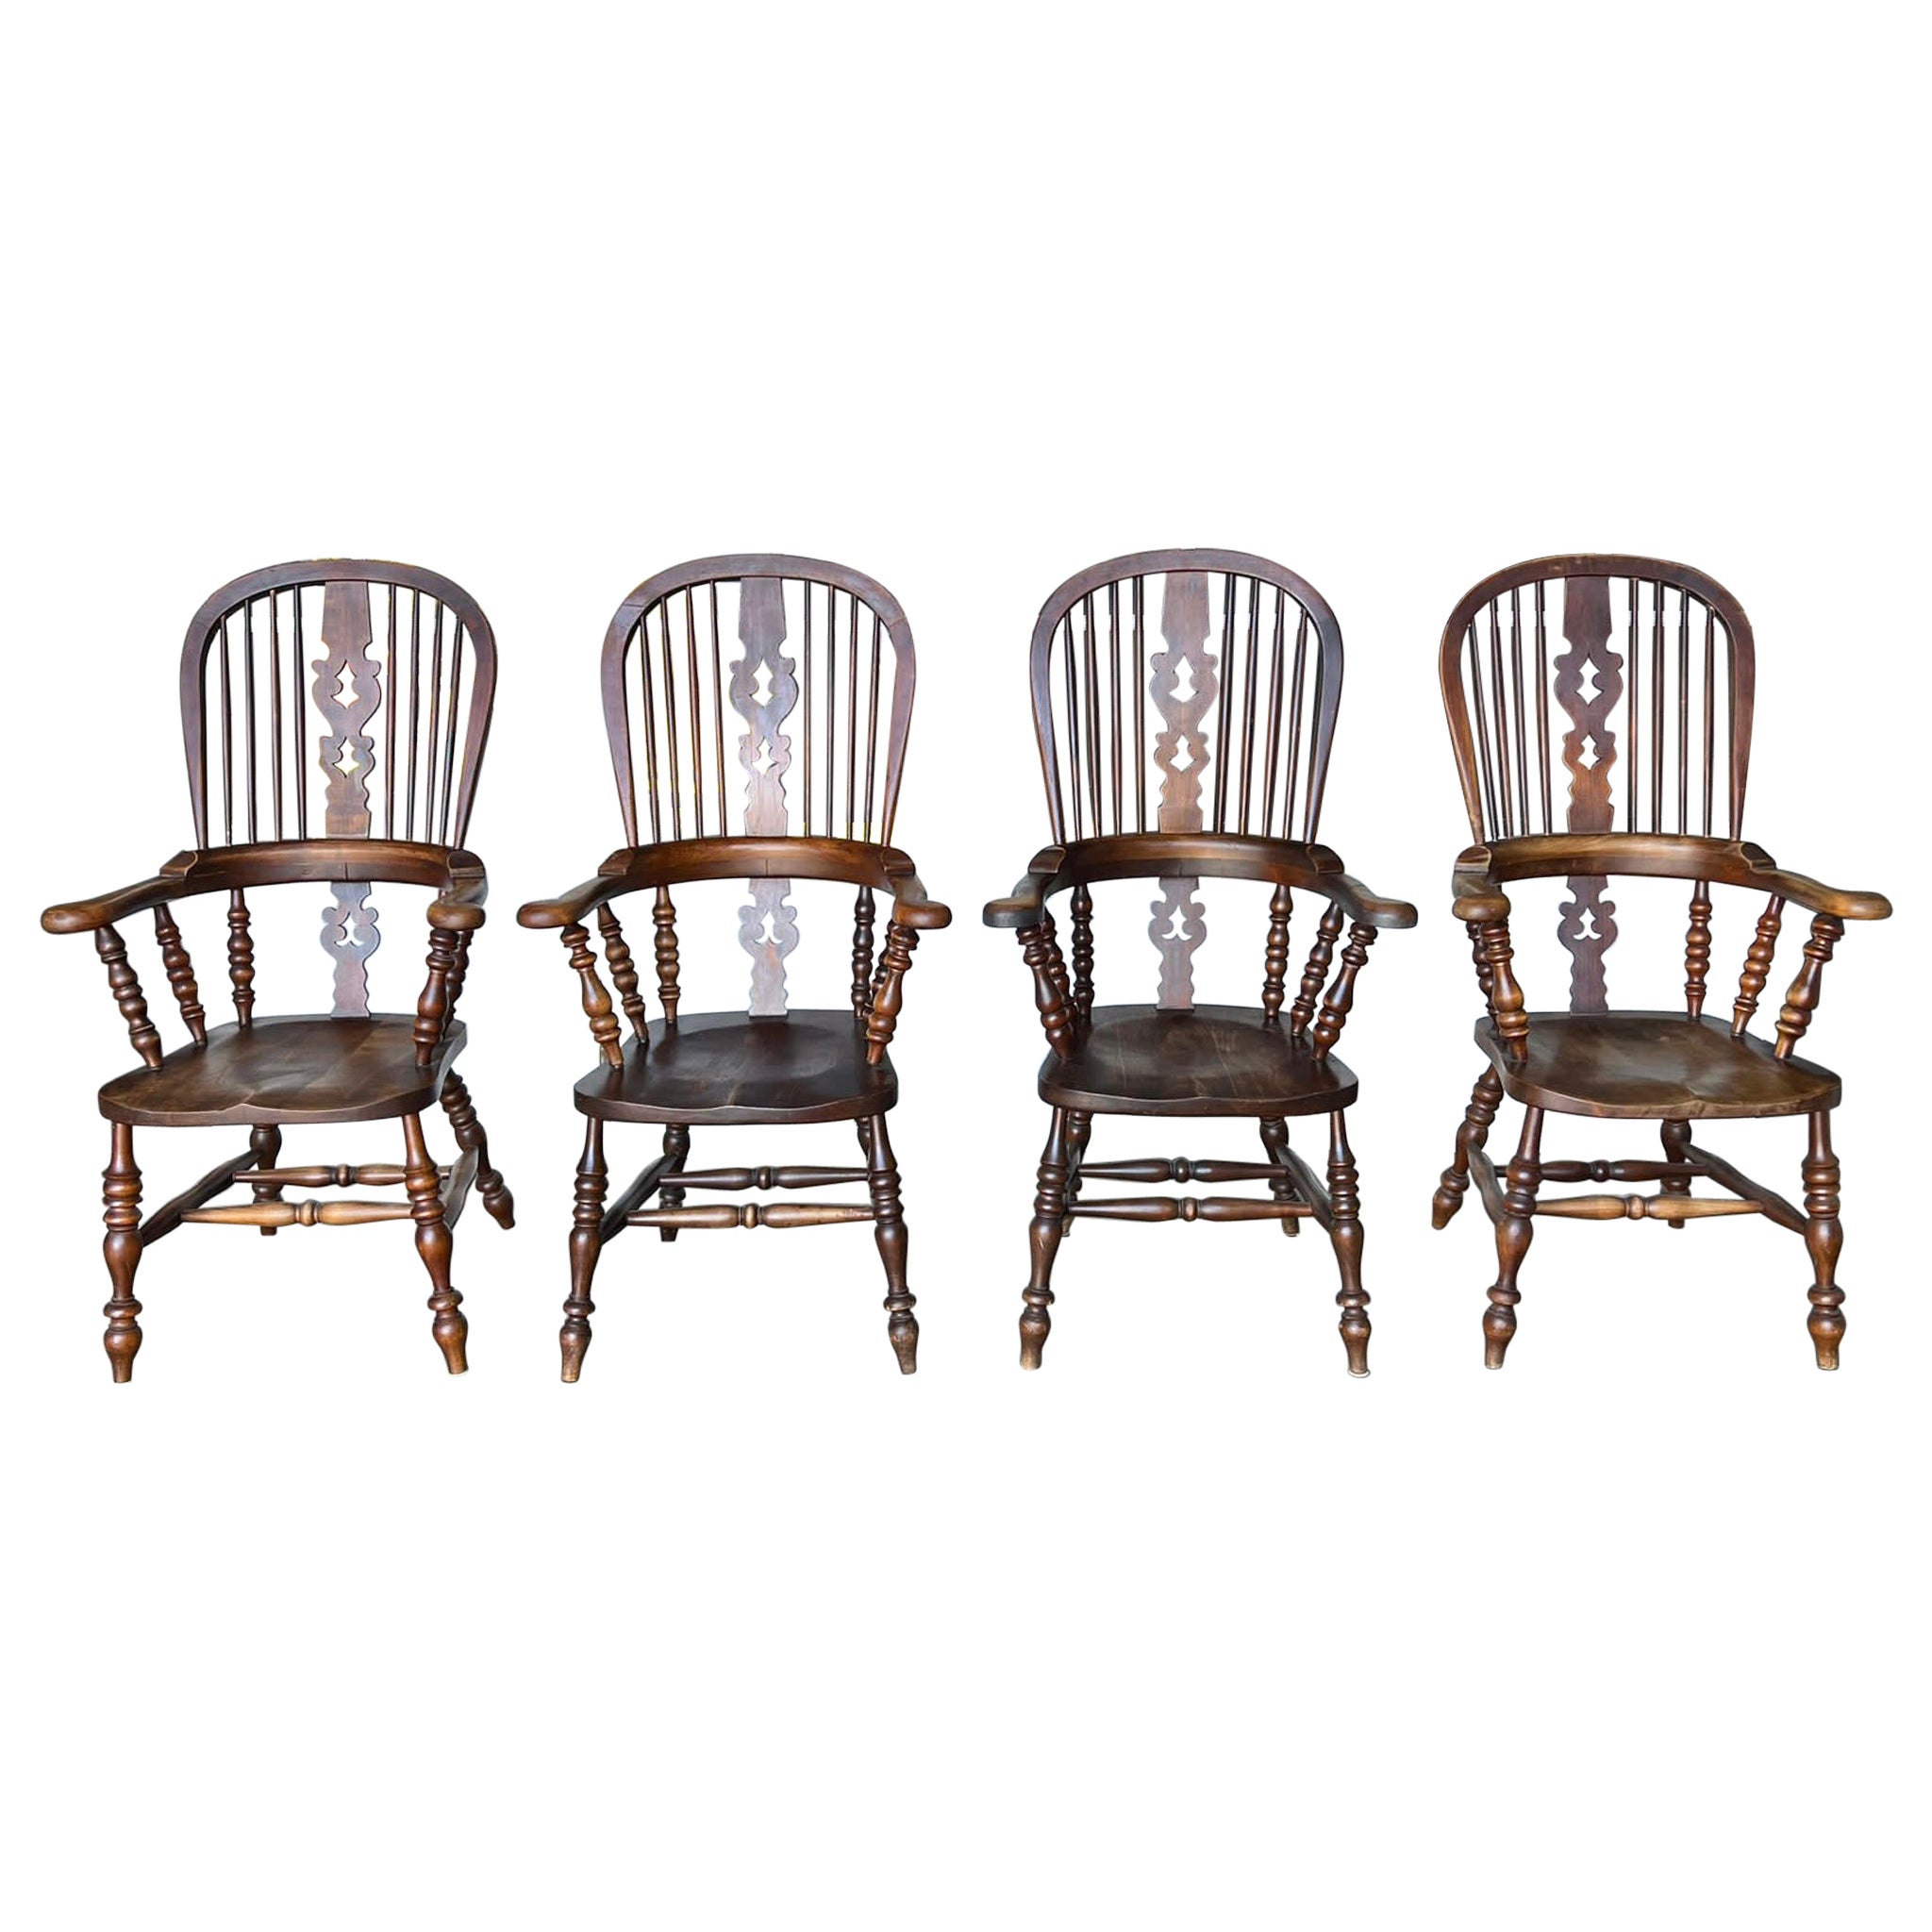 Harlequin Set 4 Antique Country Broad Arm Chairs For Sale